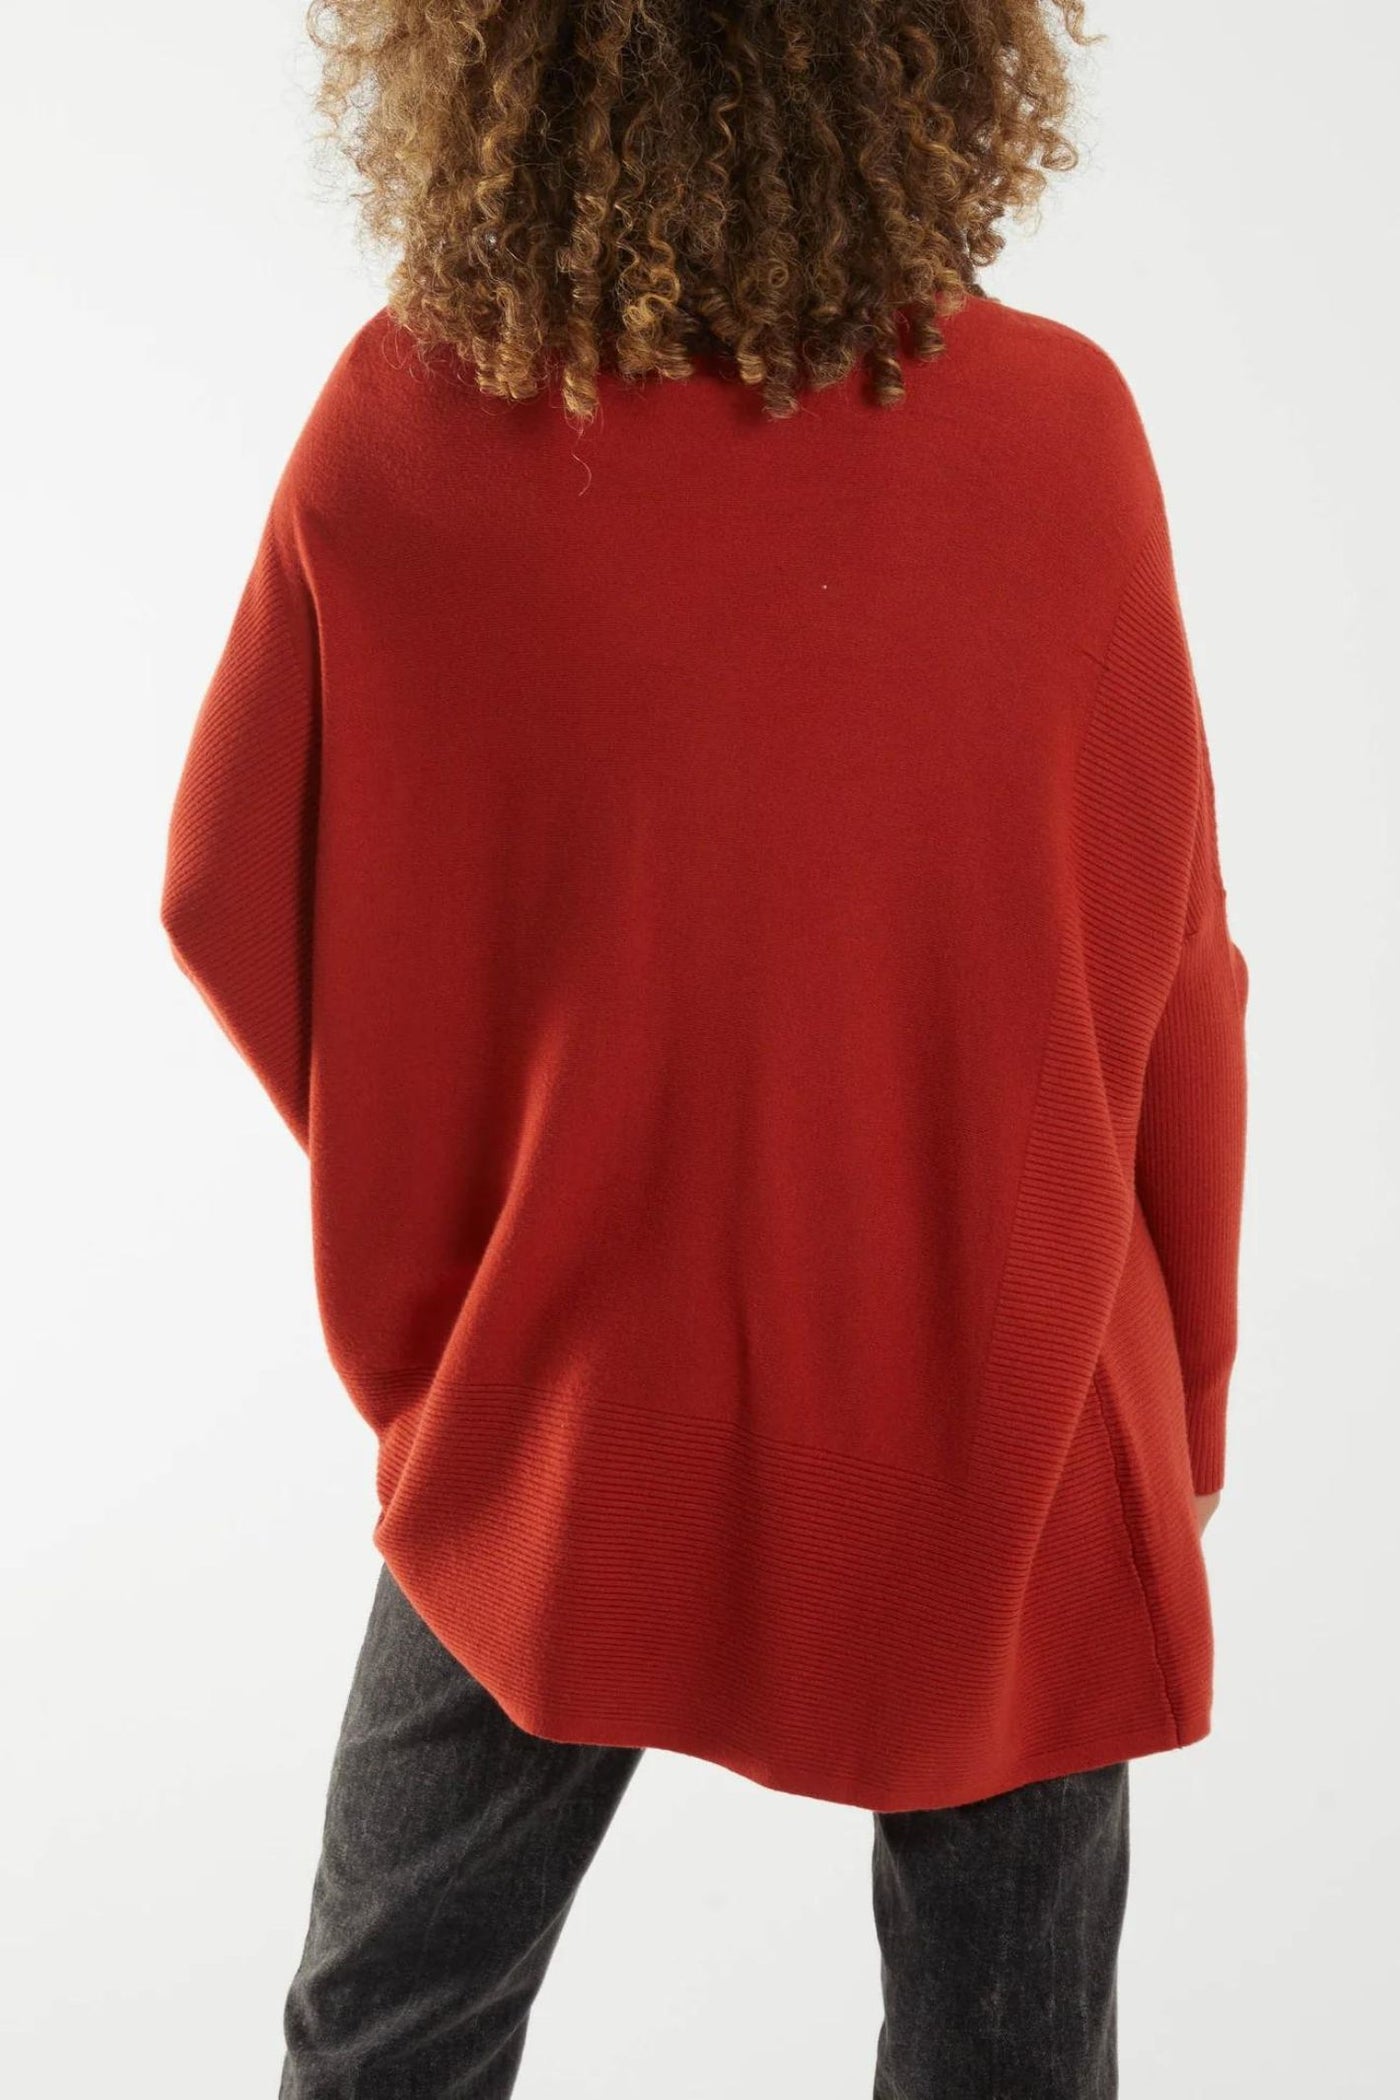 Izzy Straight Neck Ribbed Sleeve Detail Jumper - Rust